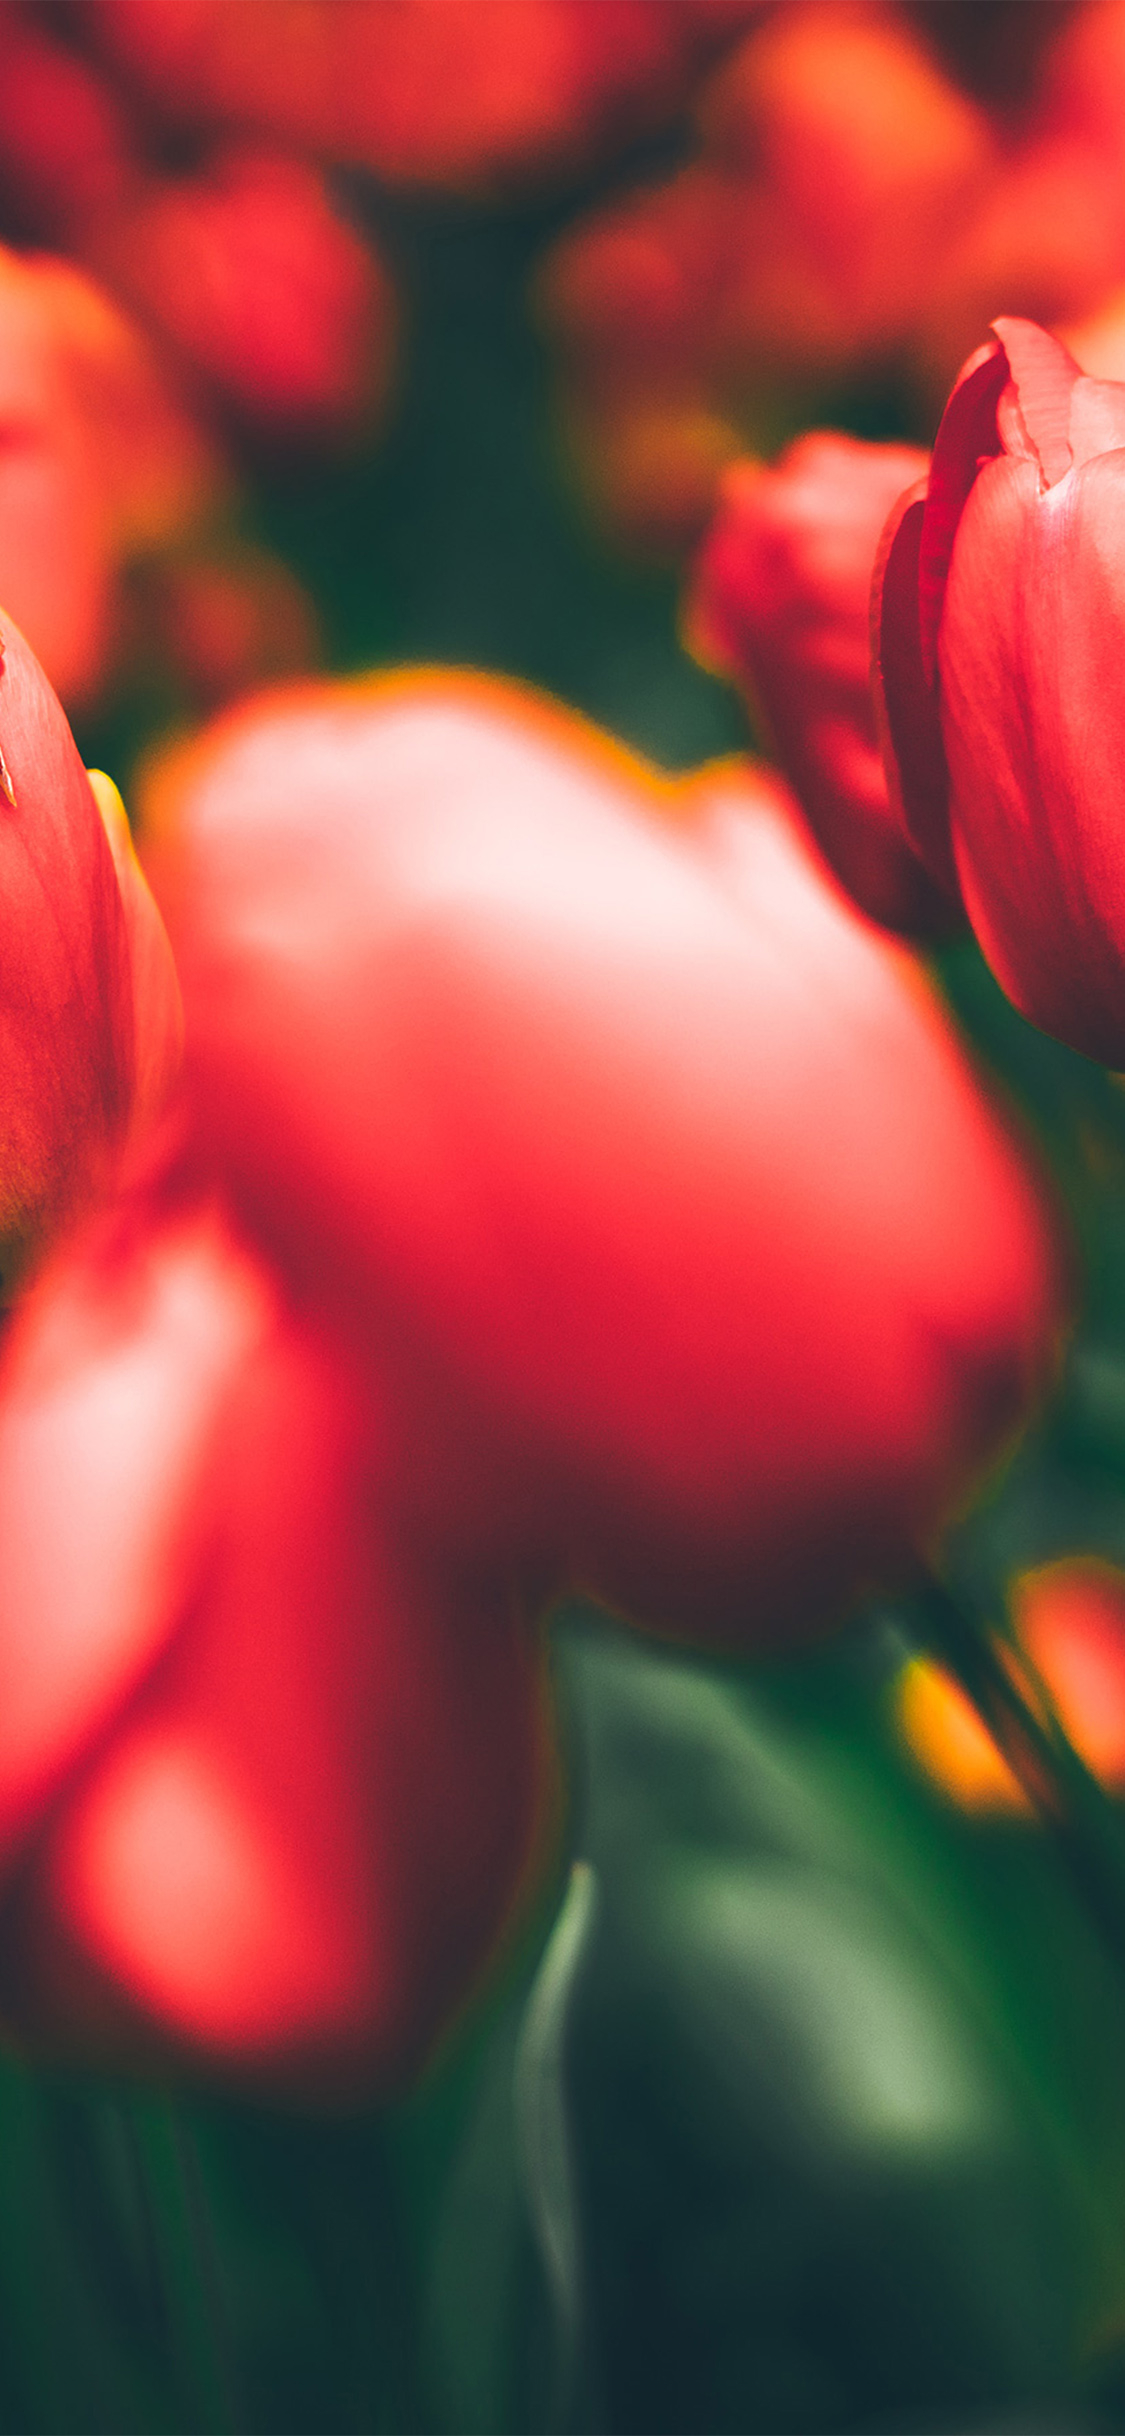 1125x2436 | iPhone11 wallpaper | nn01-tulips-red-flower-nature- spring